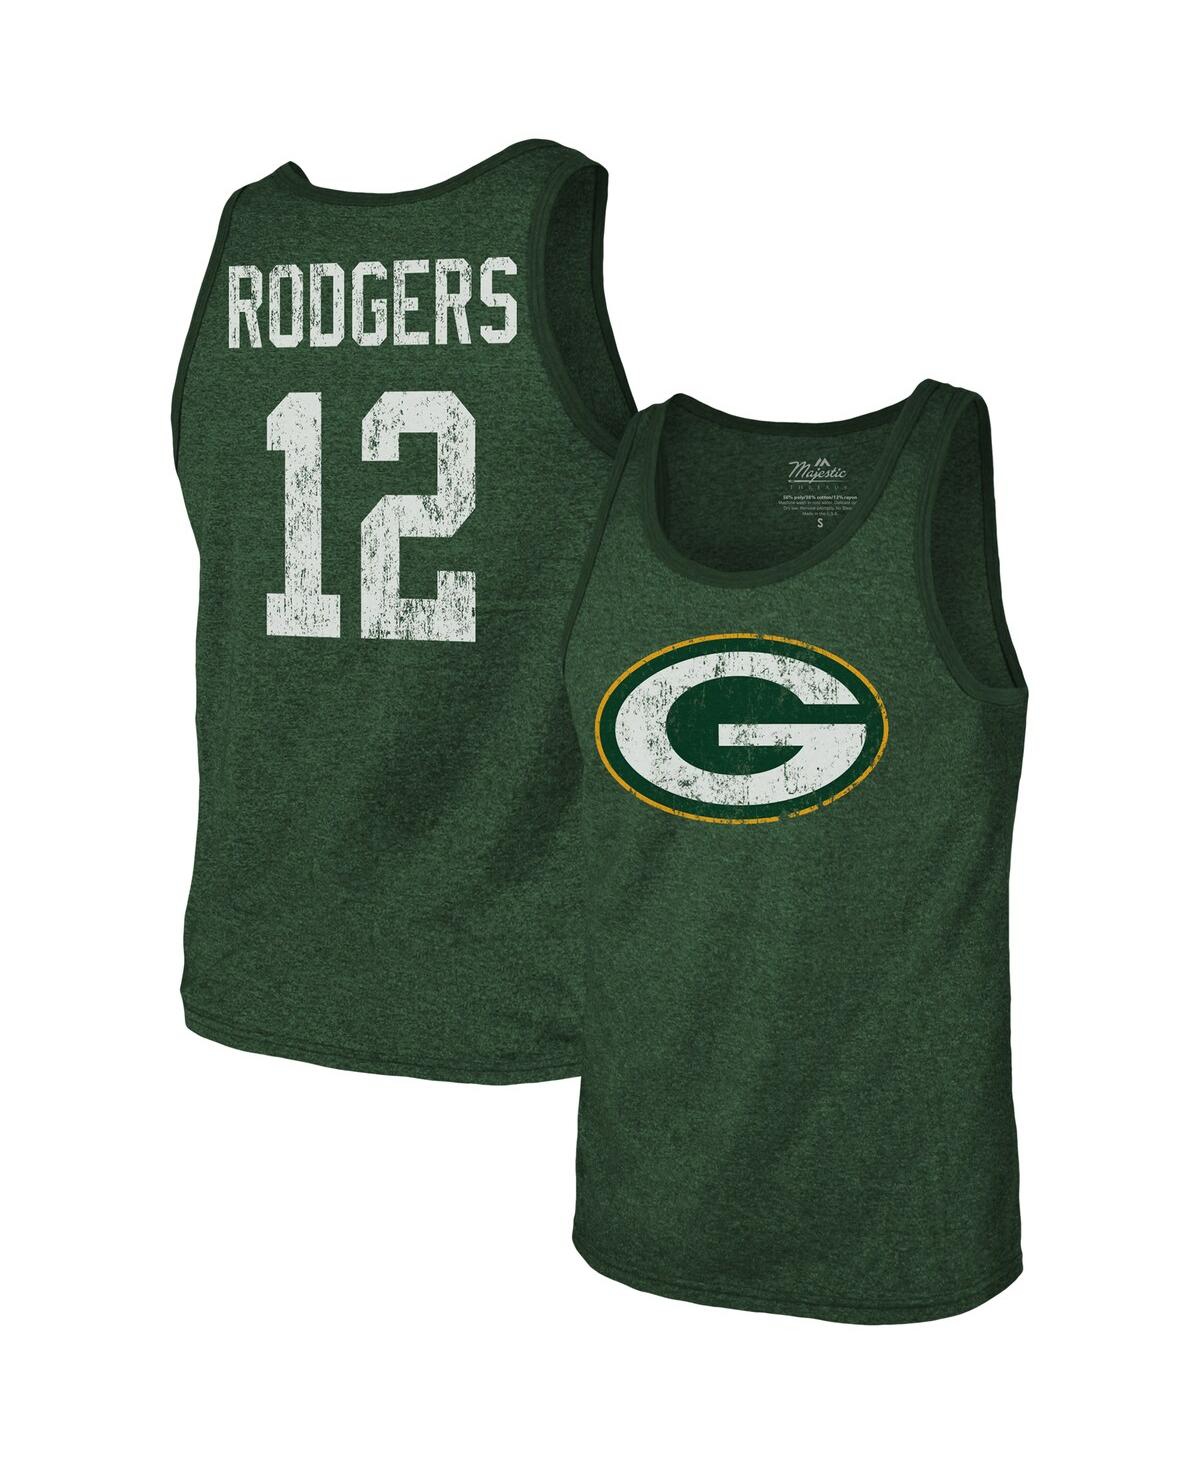 Men's Majestic Threads Aaron Rodgers Green Green Bay Packers Name & Number Tri-Blend Tank Top - Green